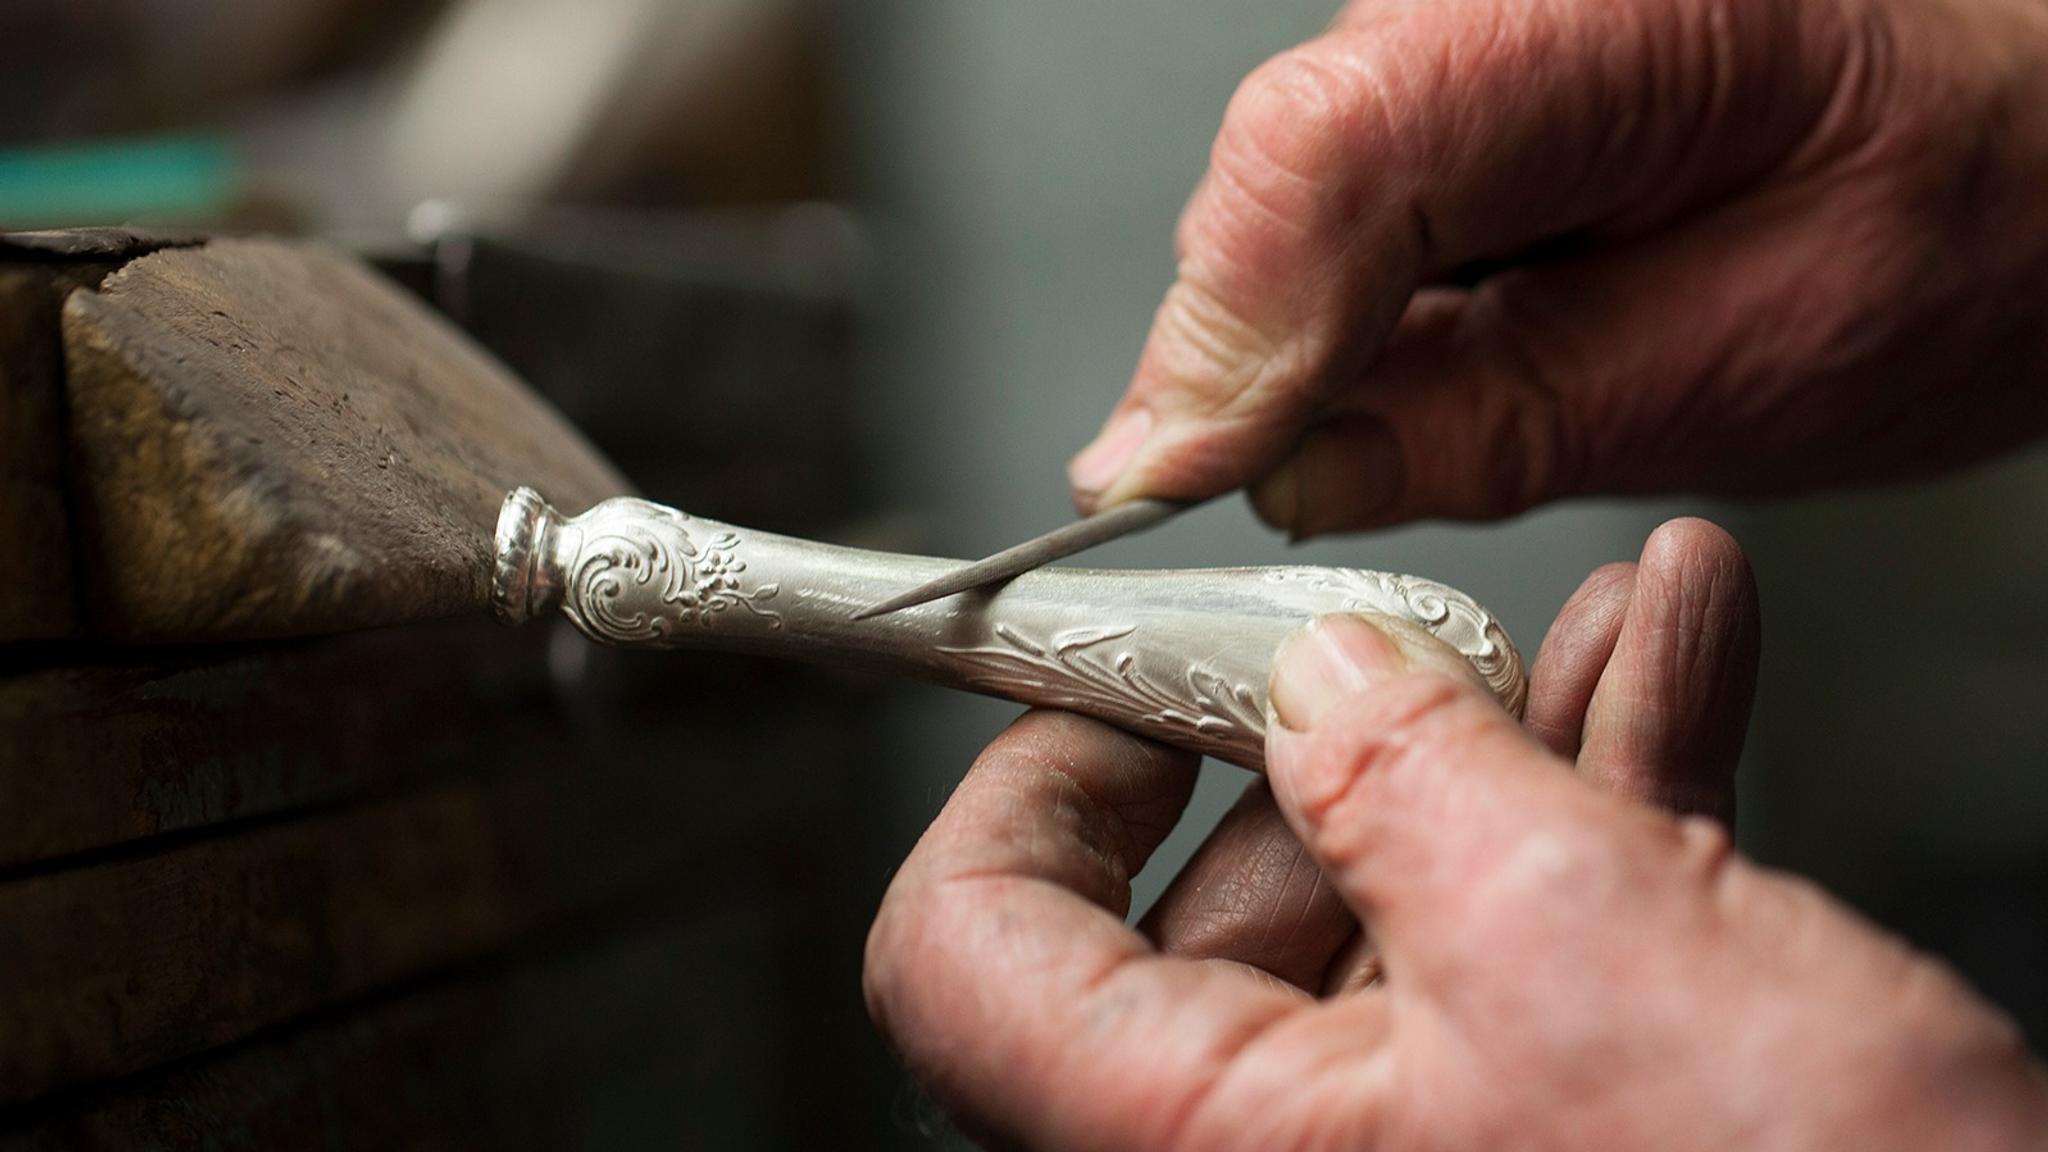 The master craftsman refining a knife handle